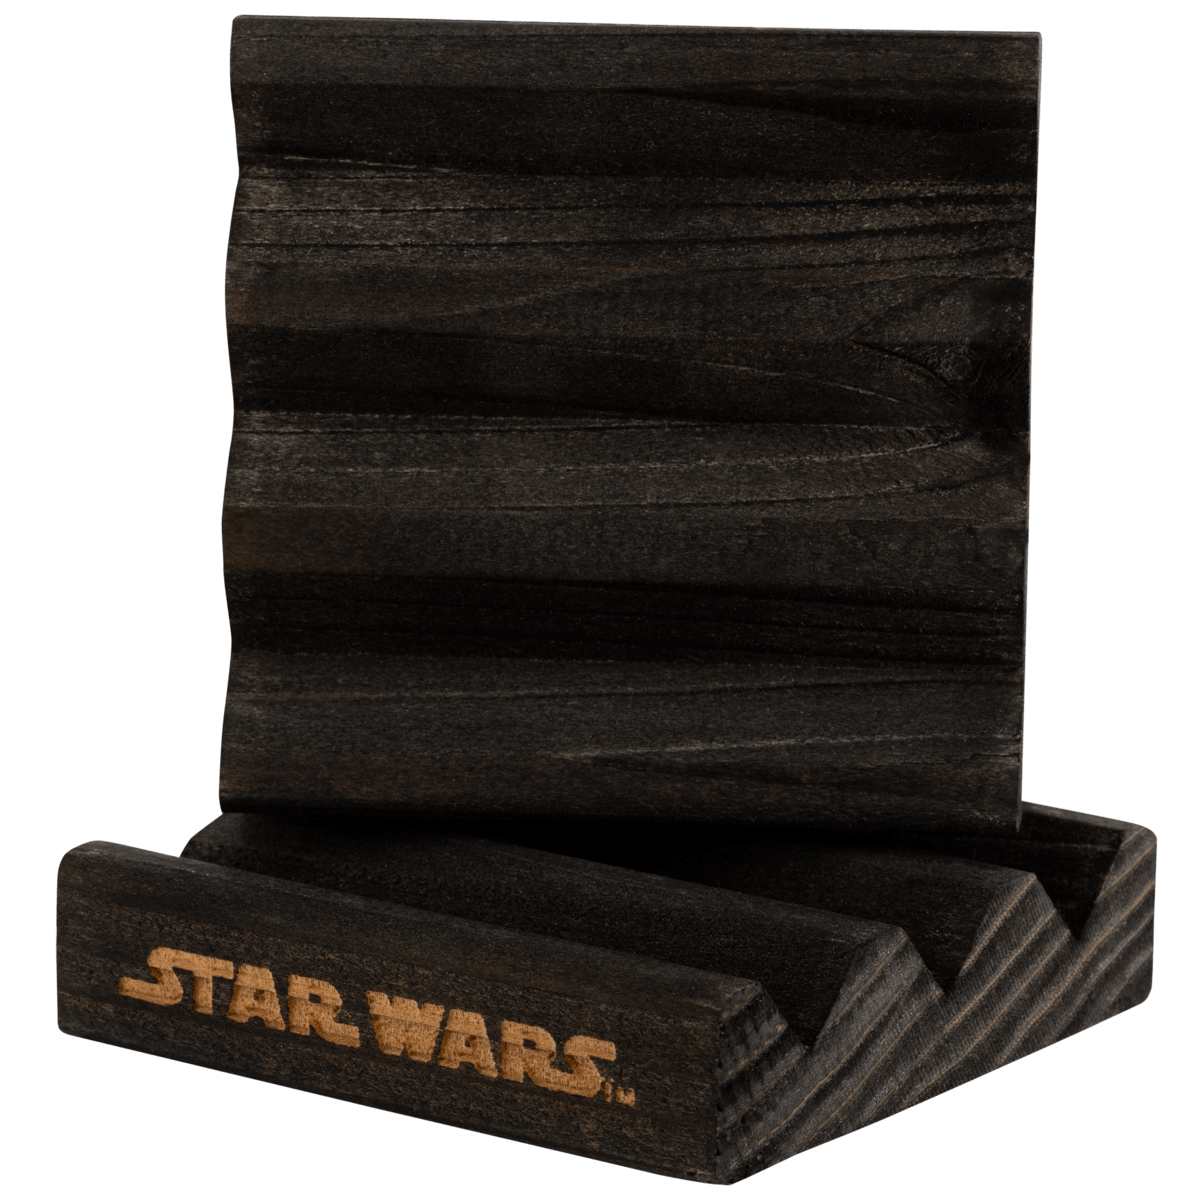 Dr Squatch Soap - Star Wars Edition: Collection I